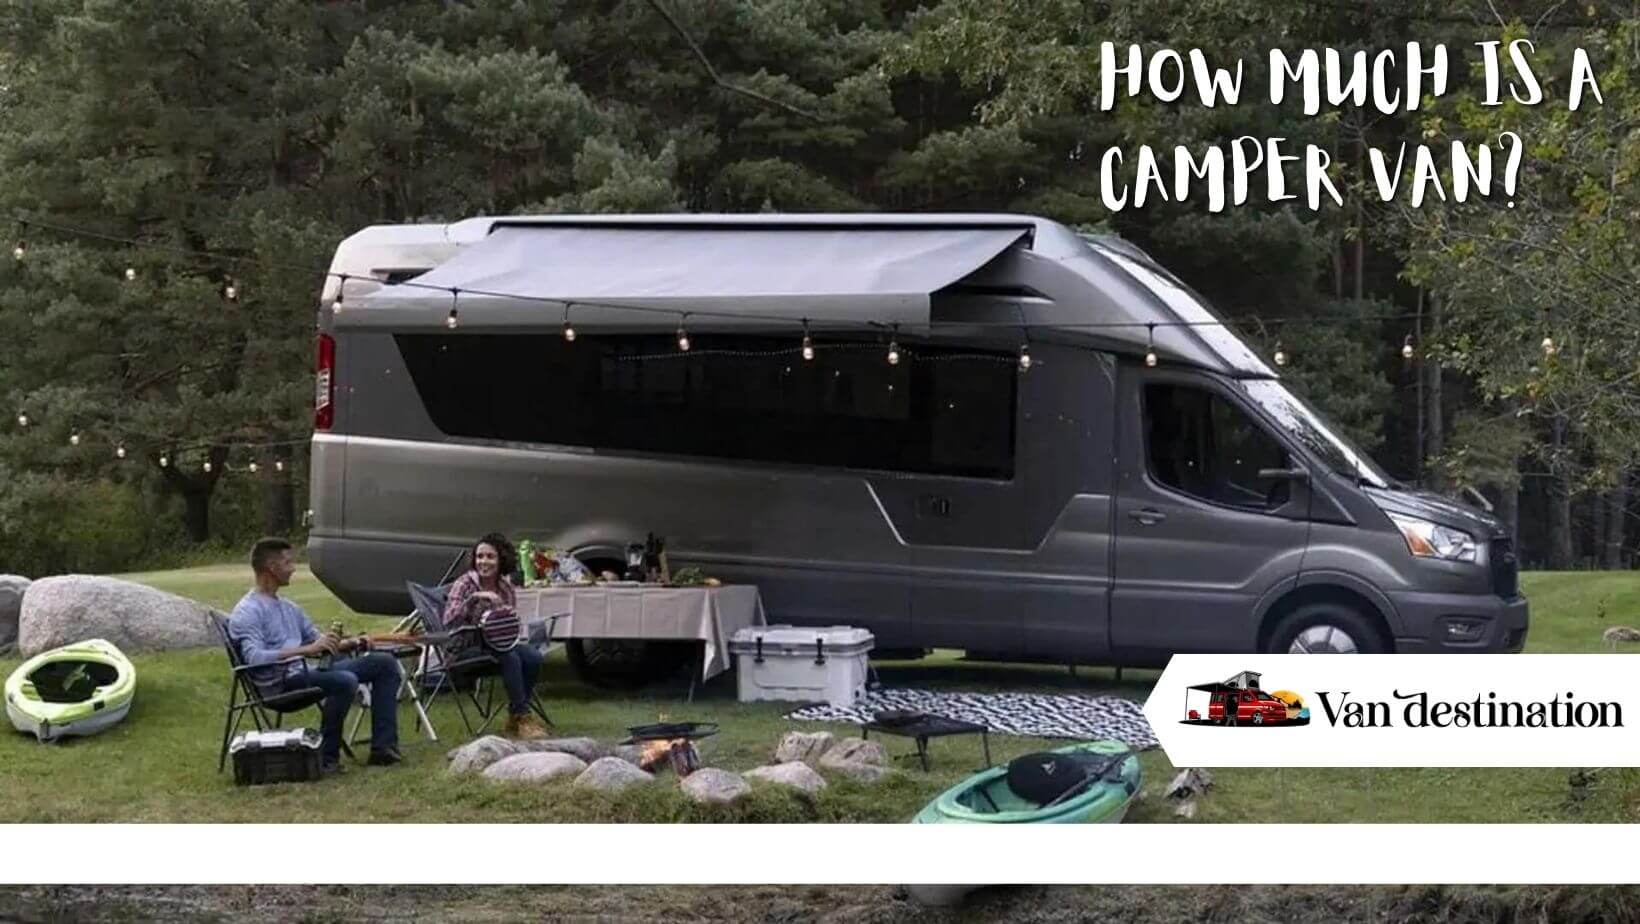 How Much is a Camper Van